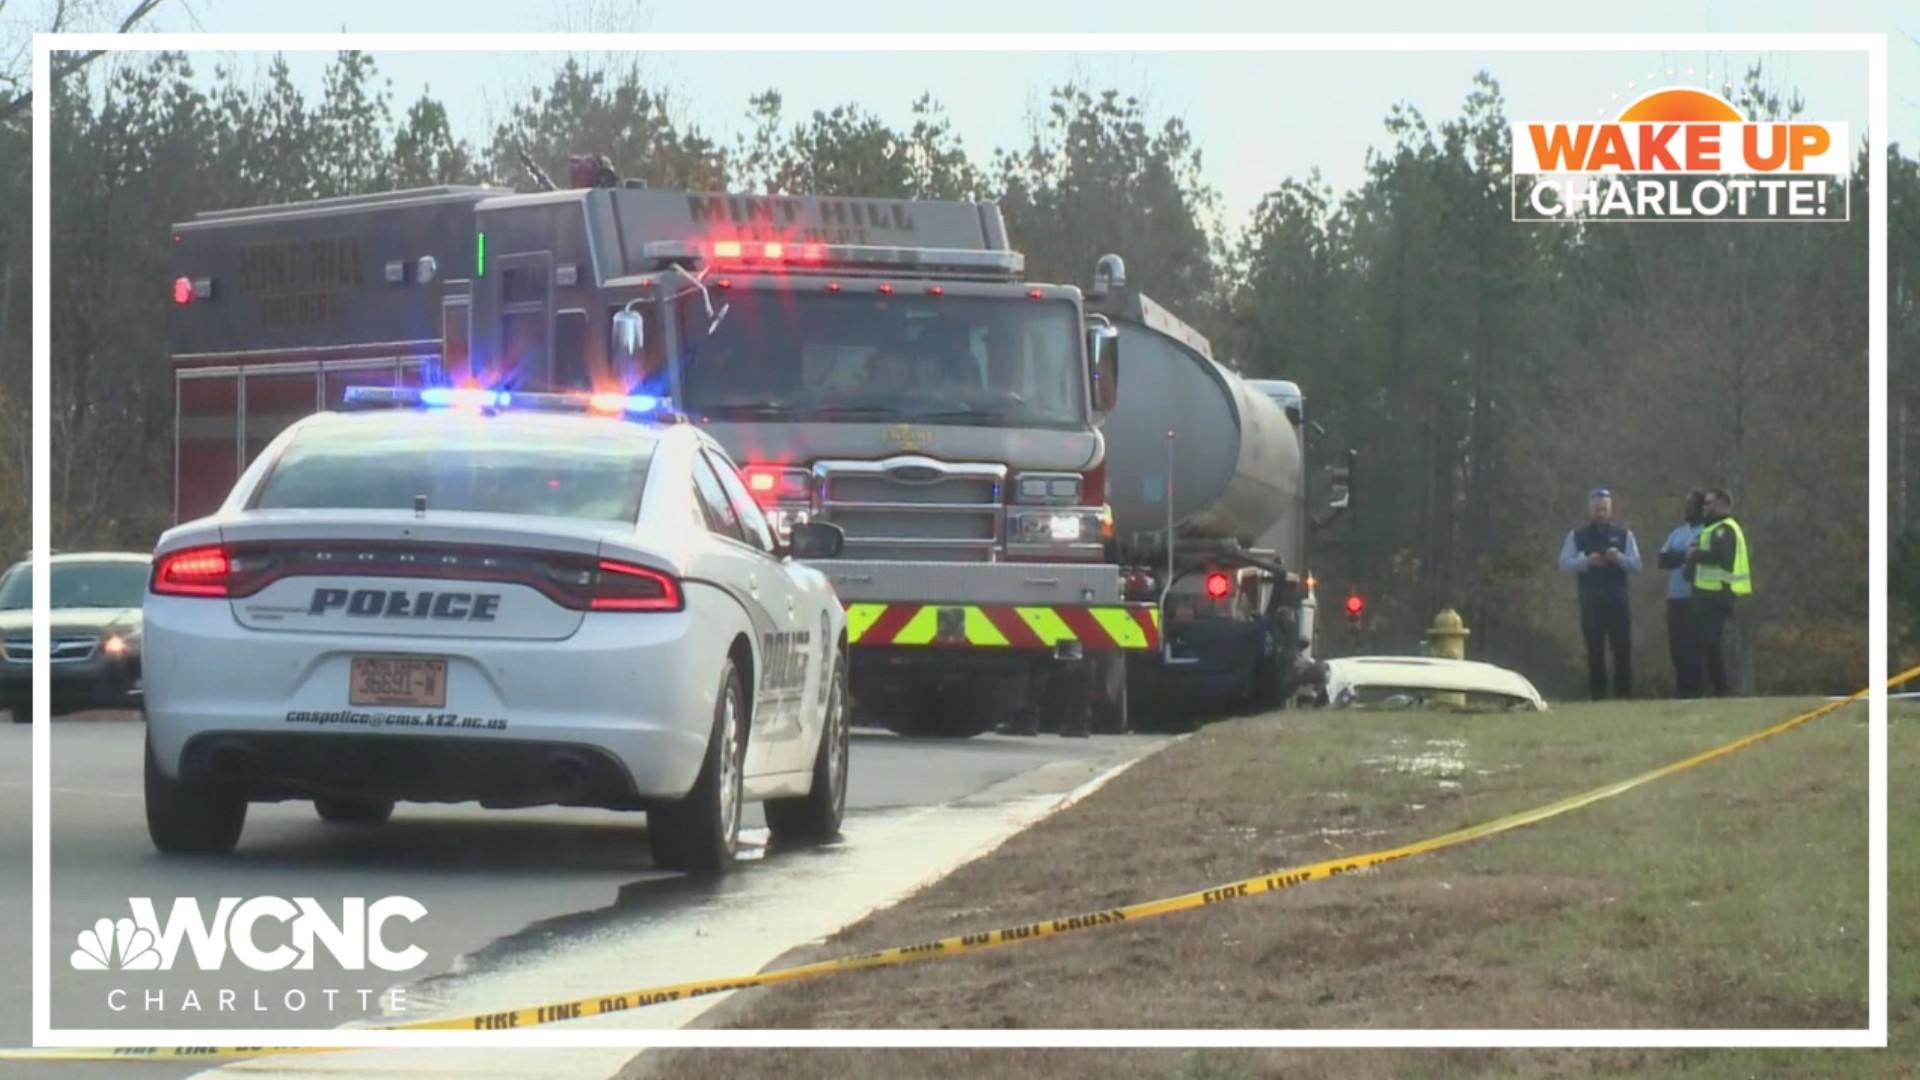 A high school student has died and two others are seriously injured after a crash in Mint Hill, the Charlotte-Mecklenburg Schools district confirmed.